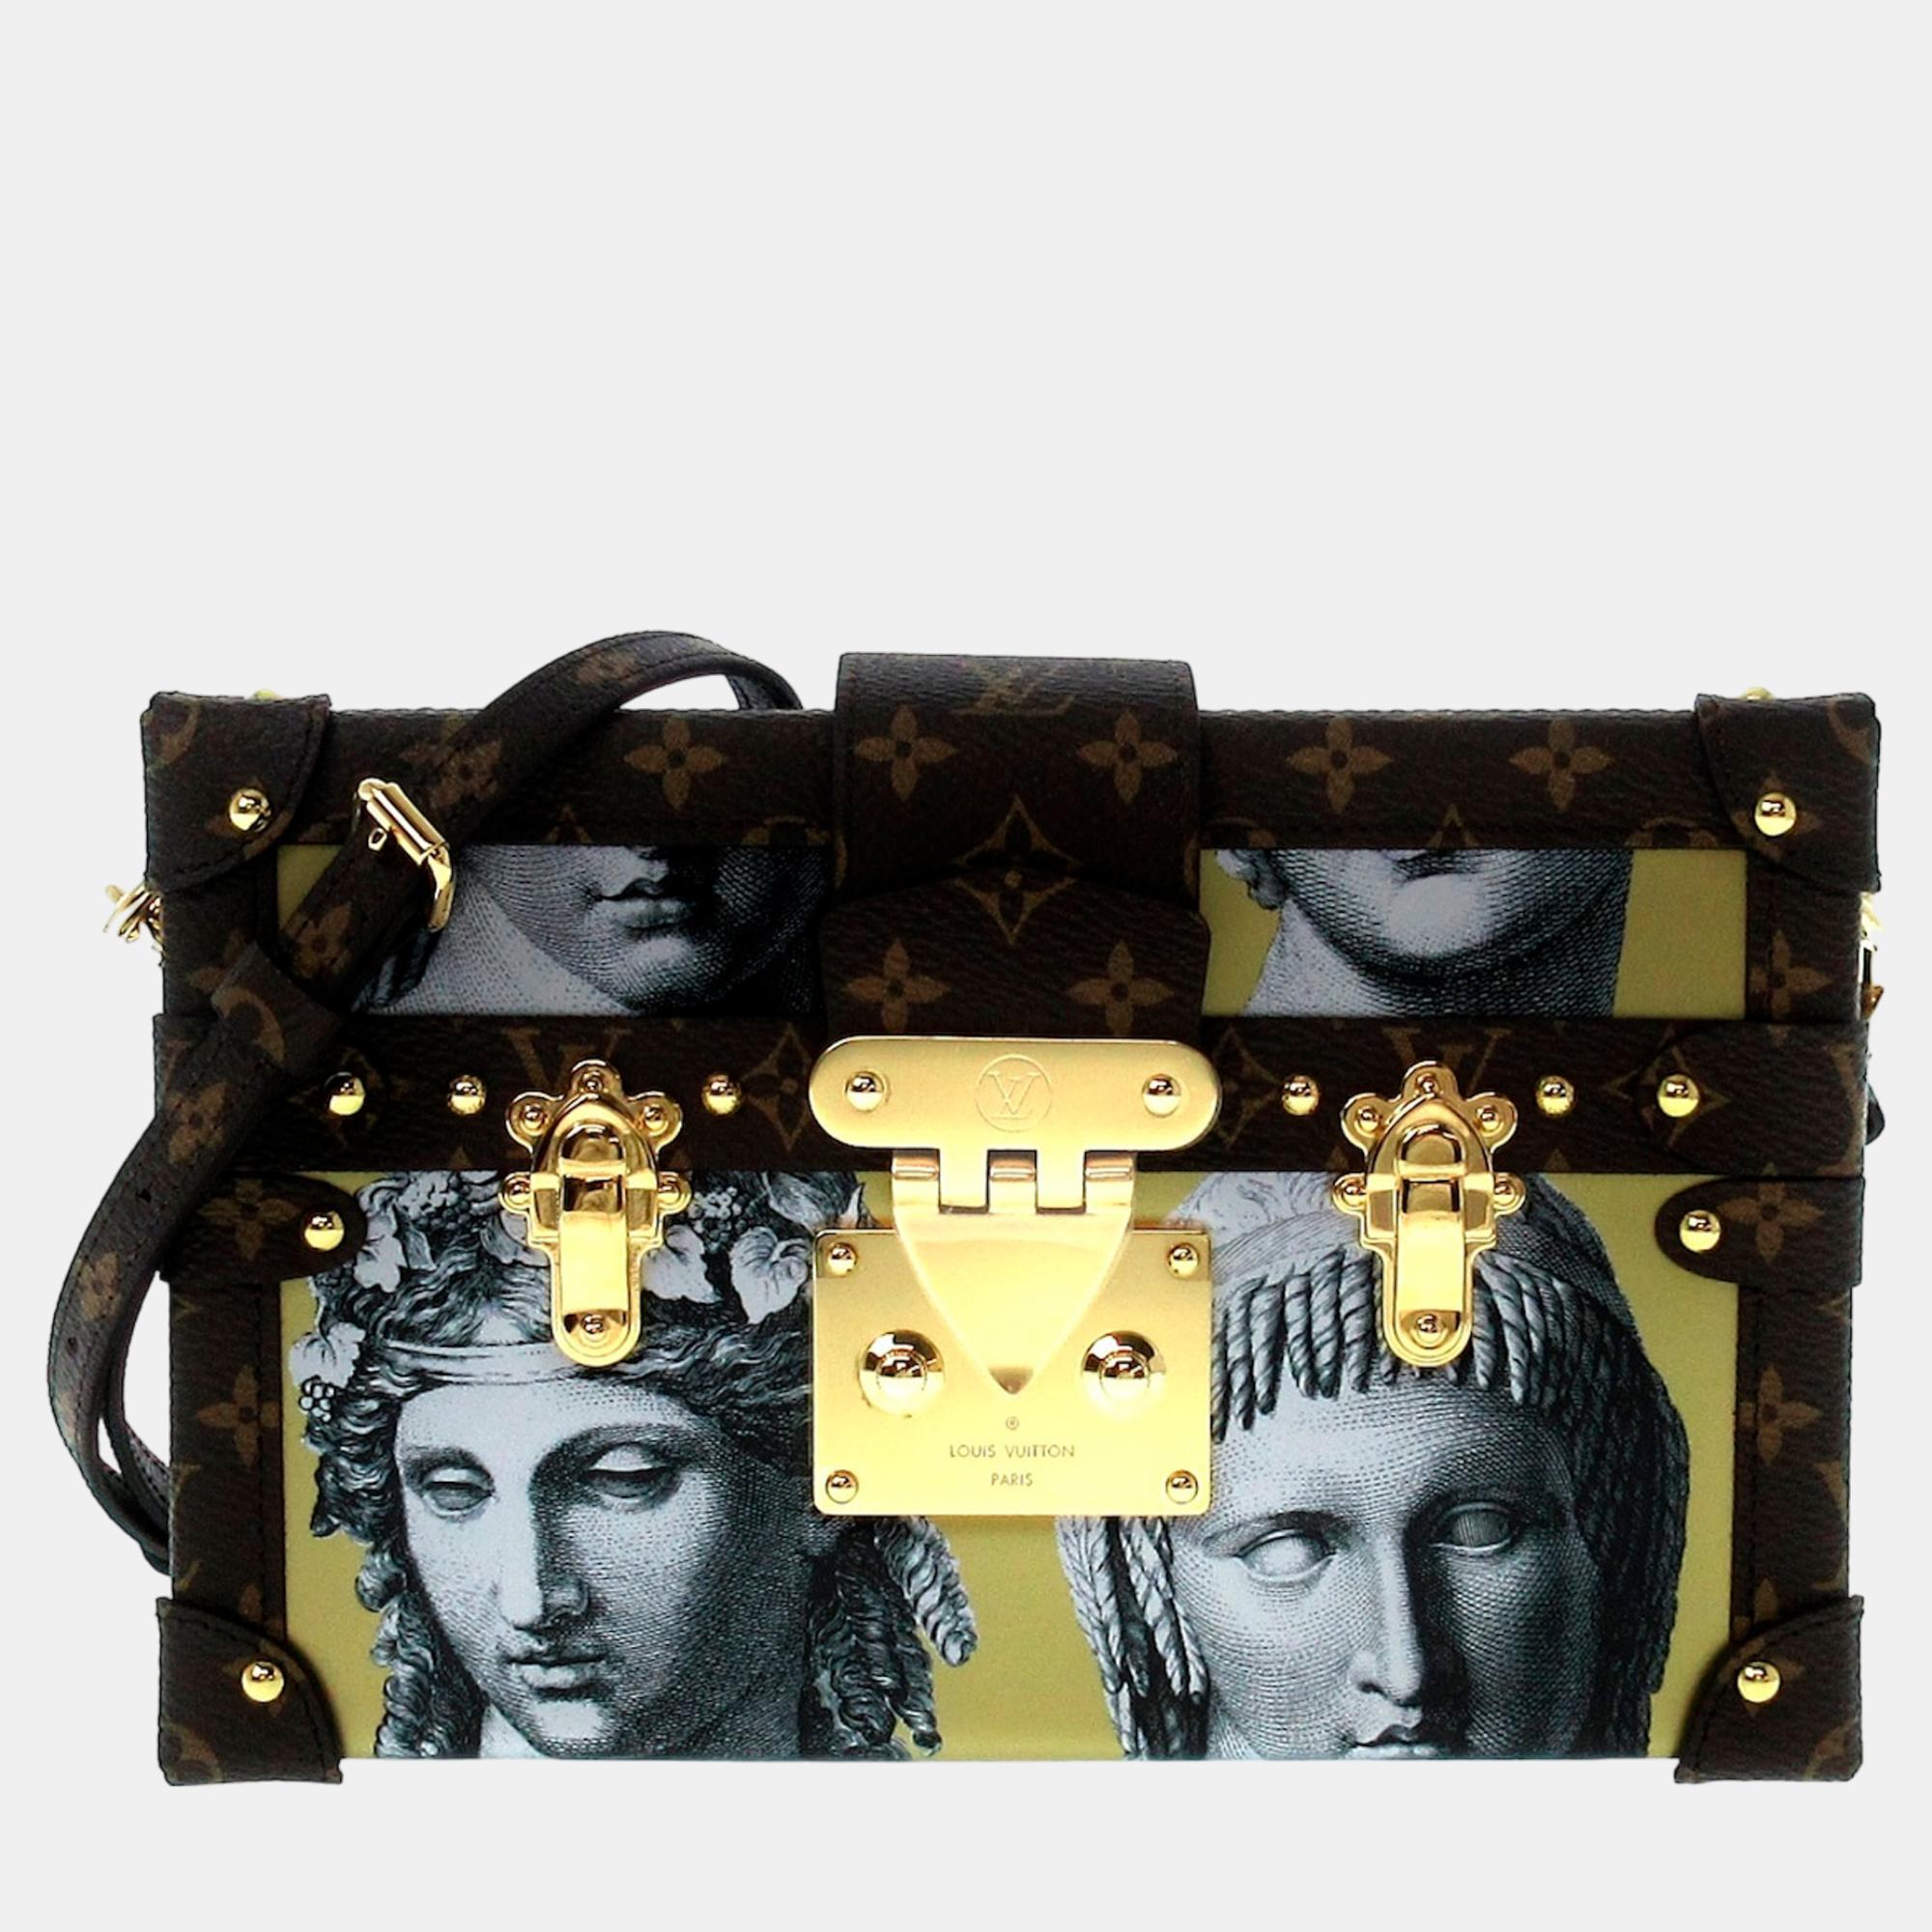 Louis Vuitton X Fornasetti Brown/Gold Monogram And Printed Leather Petite Malle